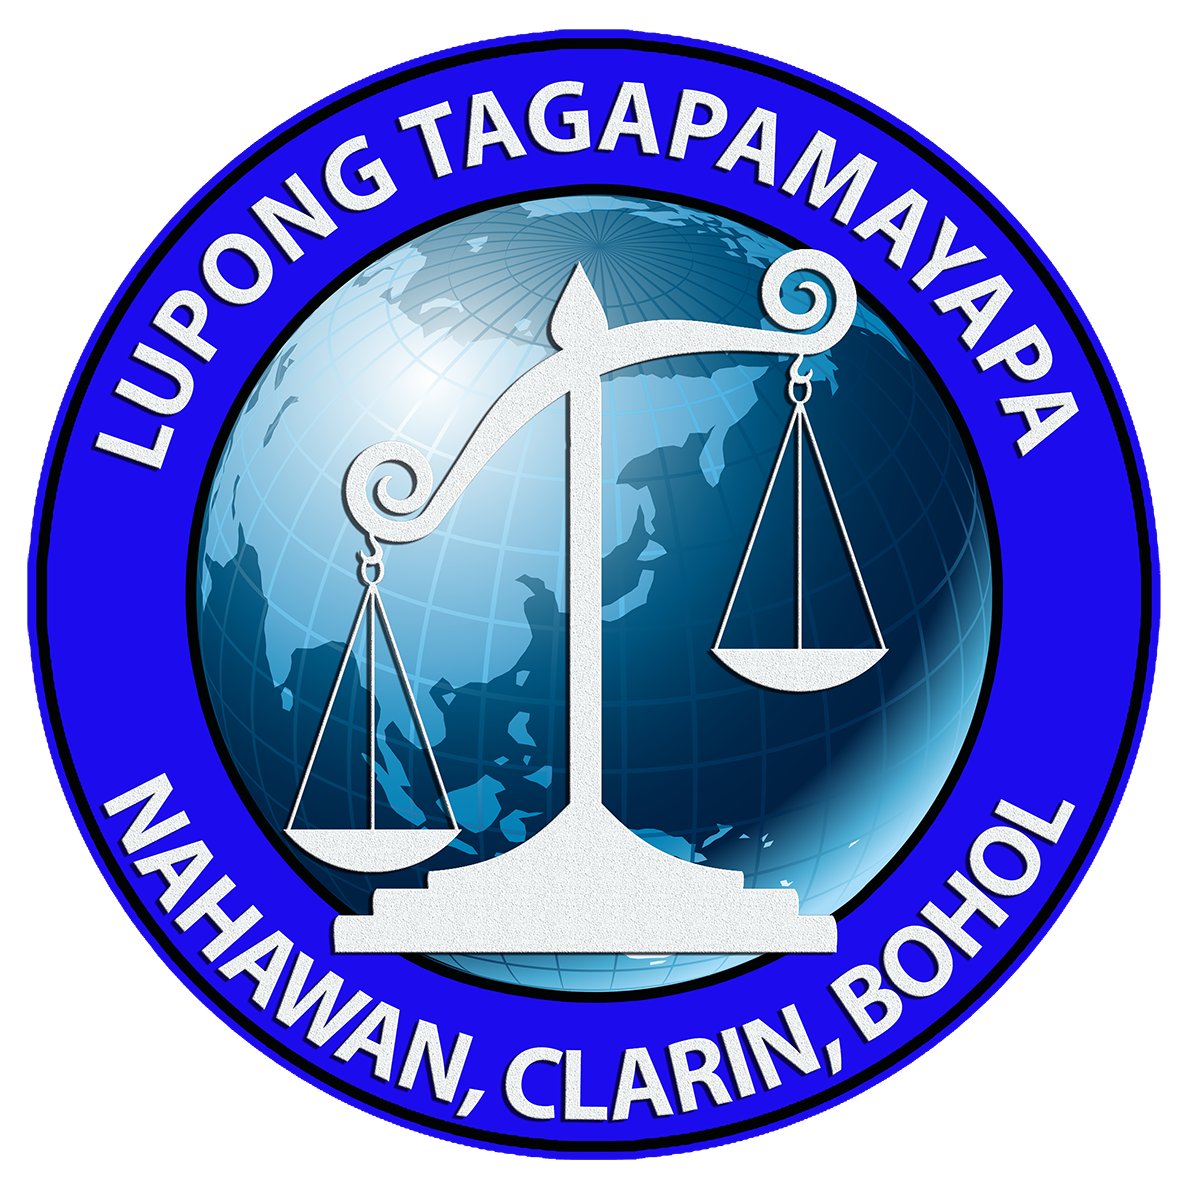 The Lupong Tagapamayapa, CY 2018 Provincial and Regional Winner in the Search for the Outstanding Lupong Tagapamayapa (4th to 6th Class Municipality Category)